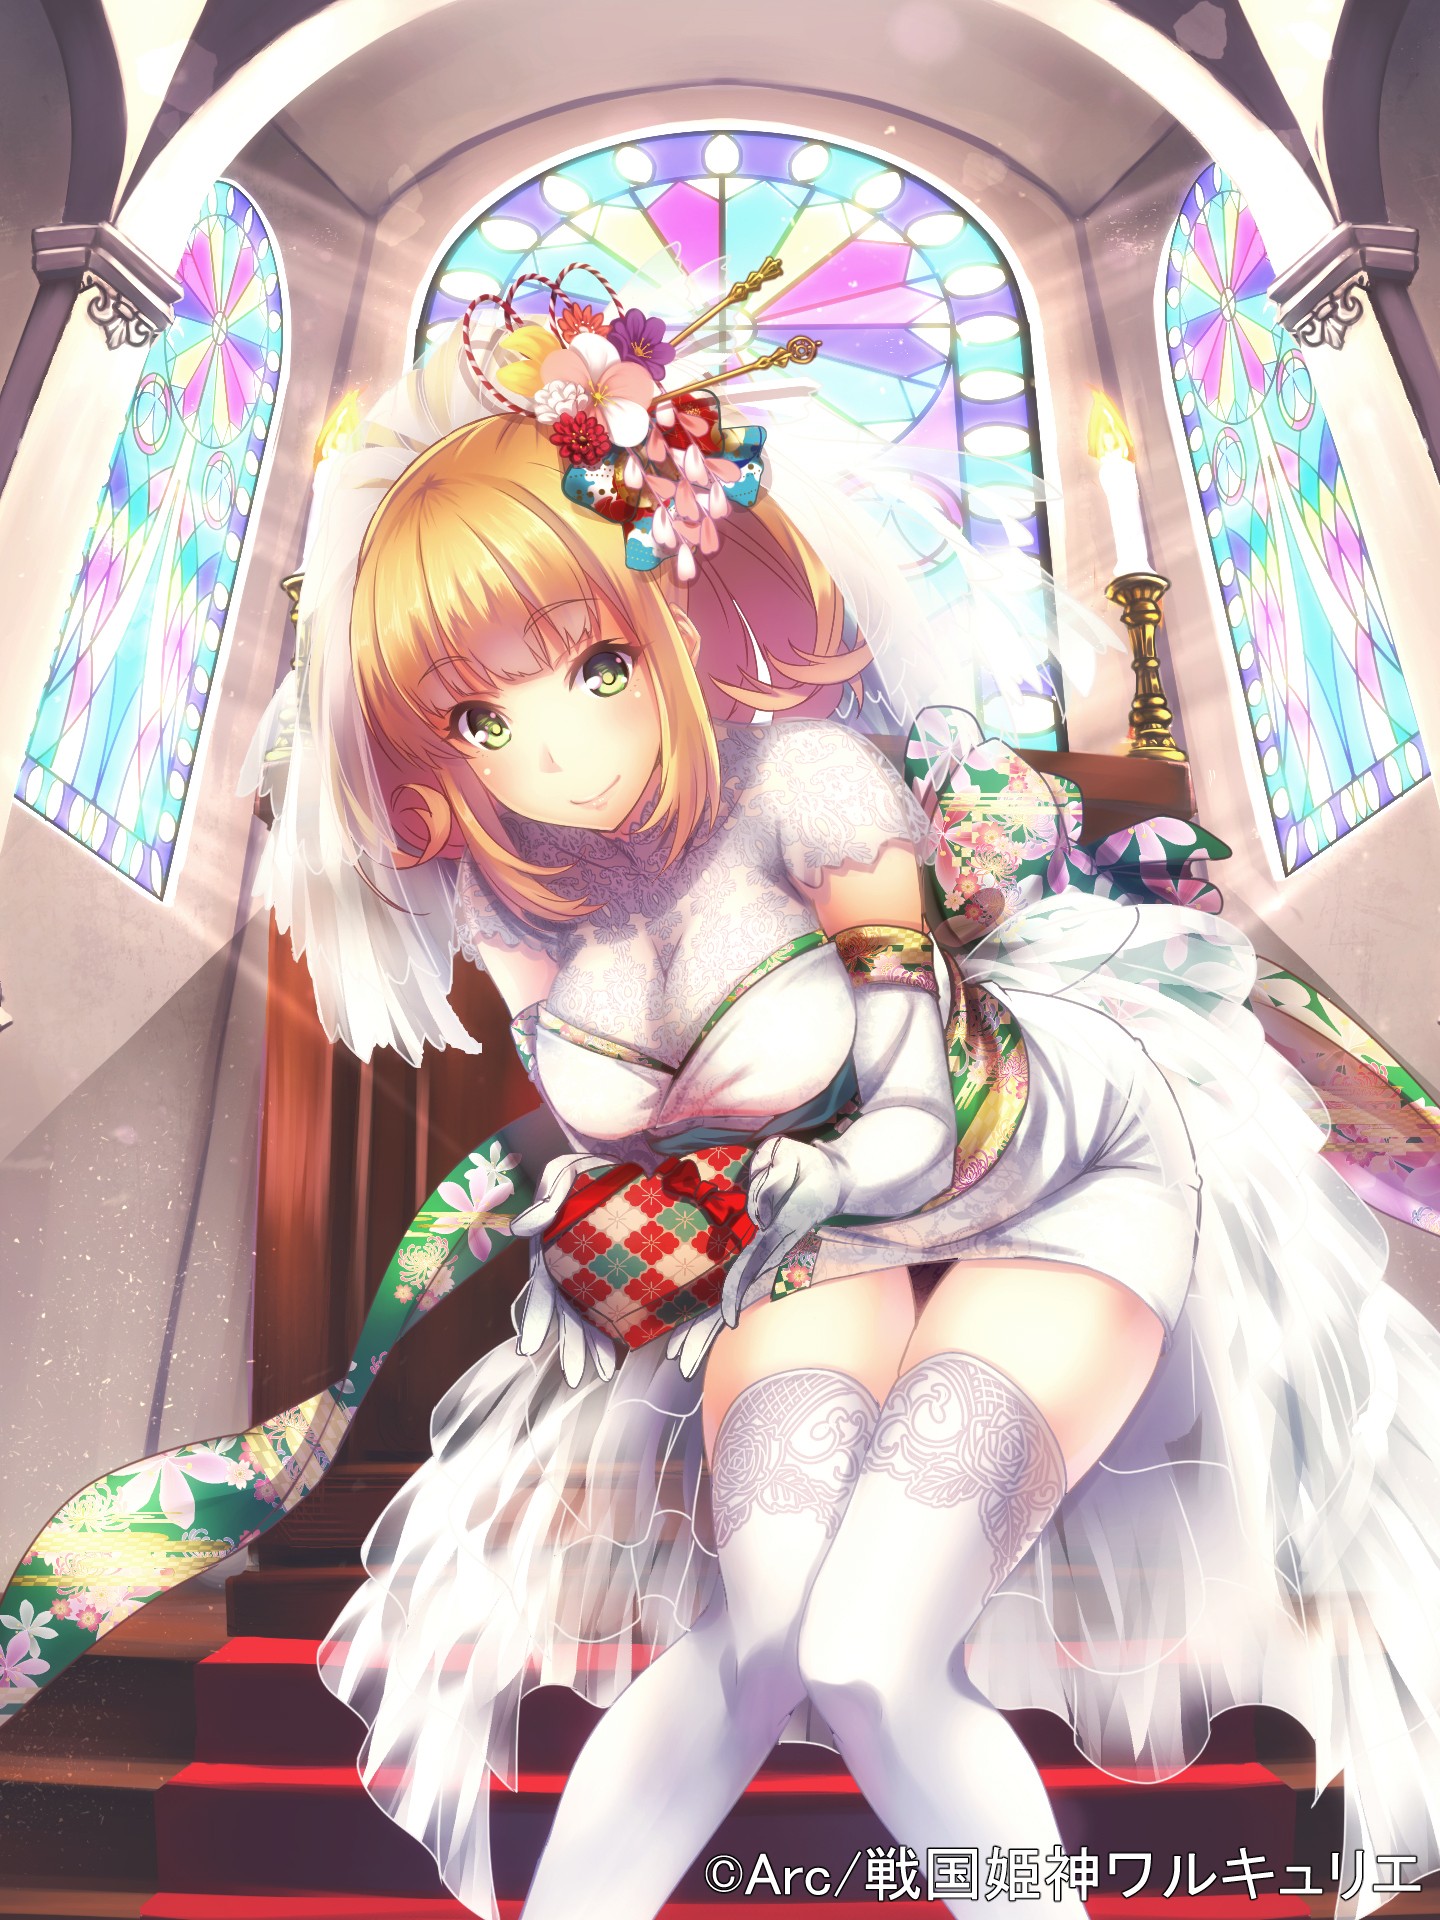 Anime 1440x1920 anime anime girls kimono long hair boobs thighs Pixiv brides stockings white clothing white stockings white dress dress green eyes looking at viewer watermarked blonde flower in hair knees together heart (design) presents